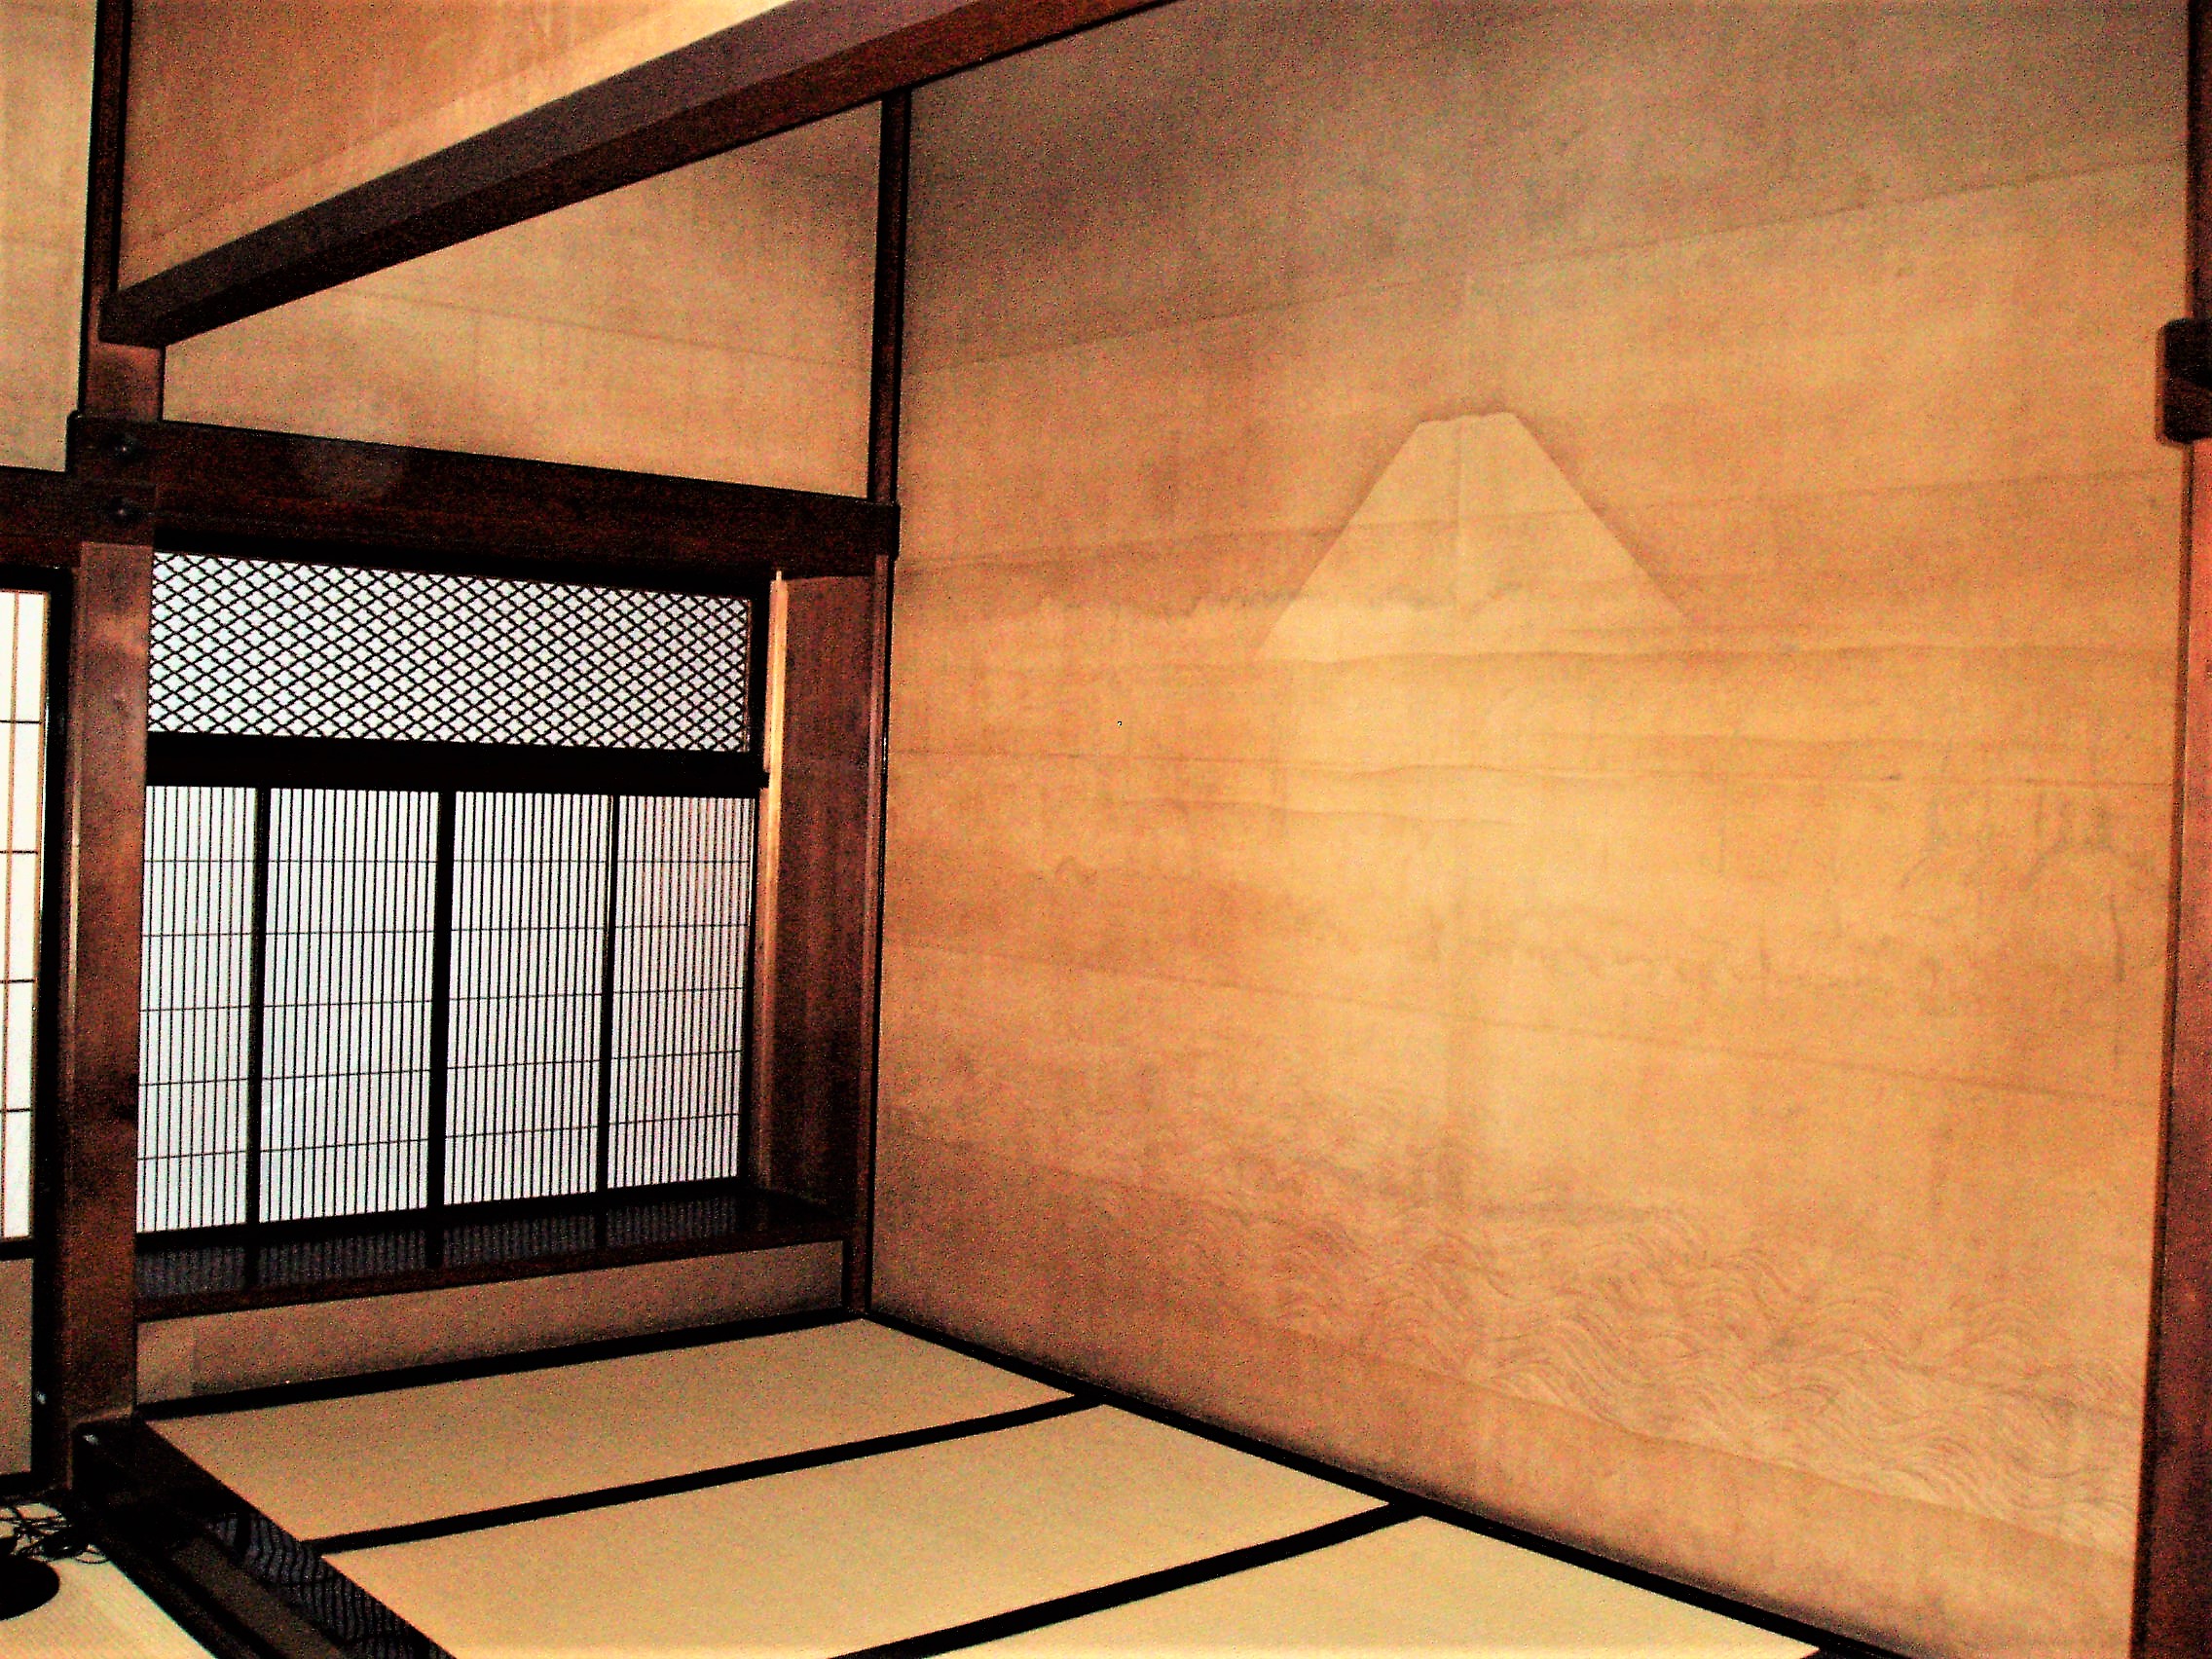 Entering the Japanese style building 2